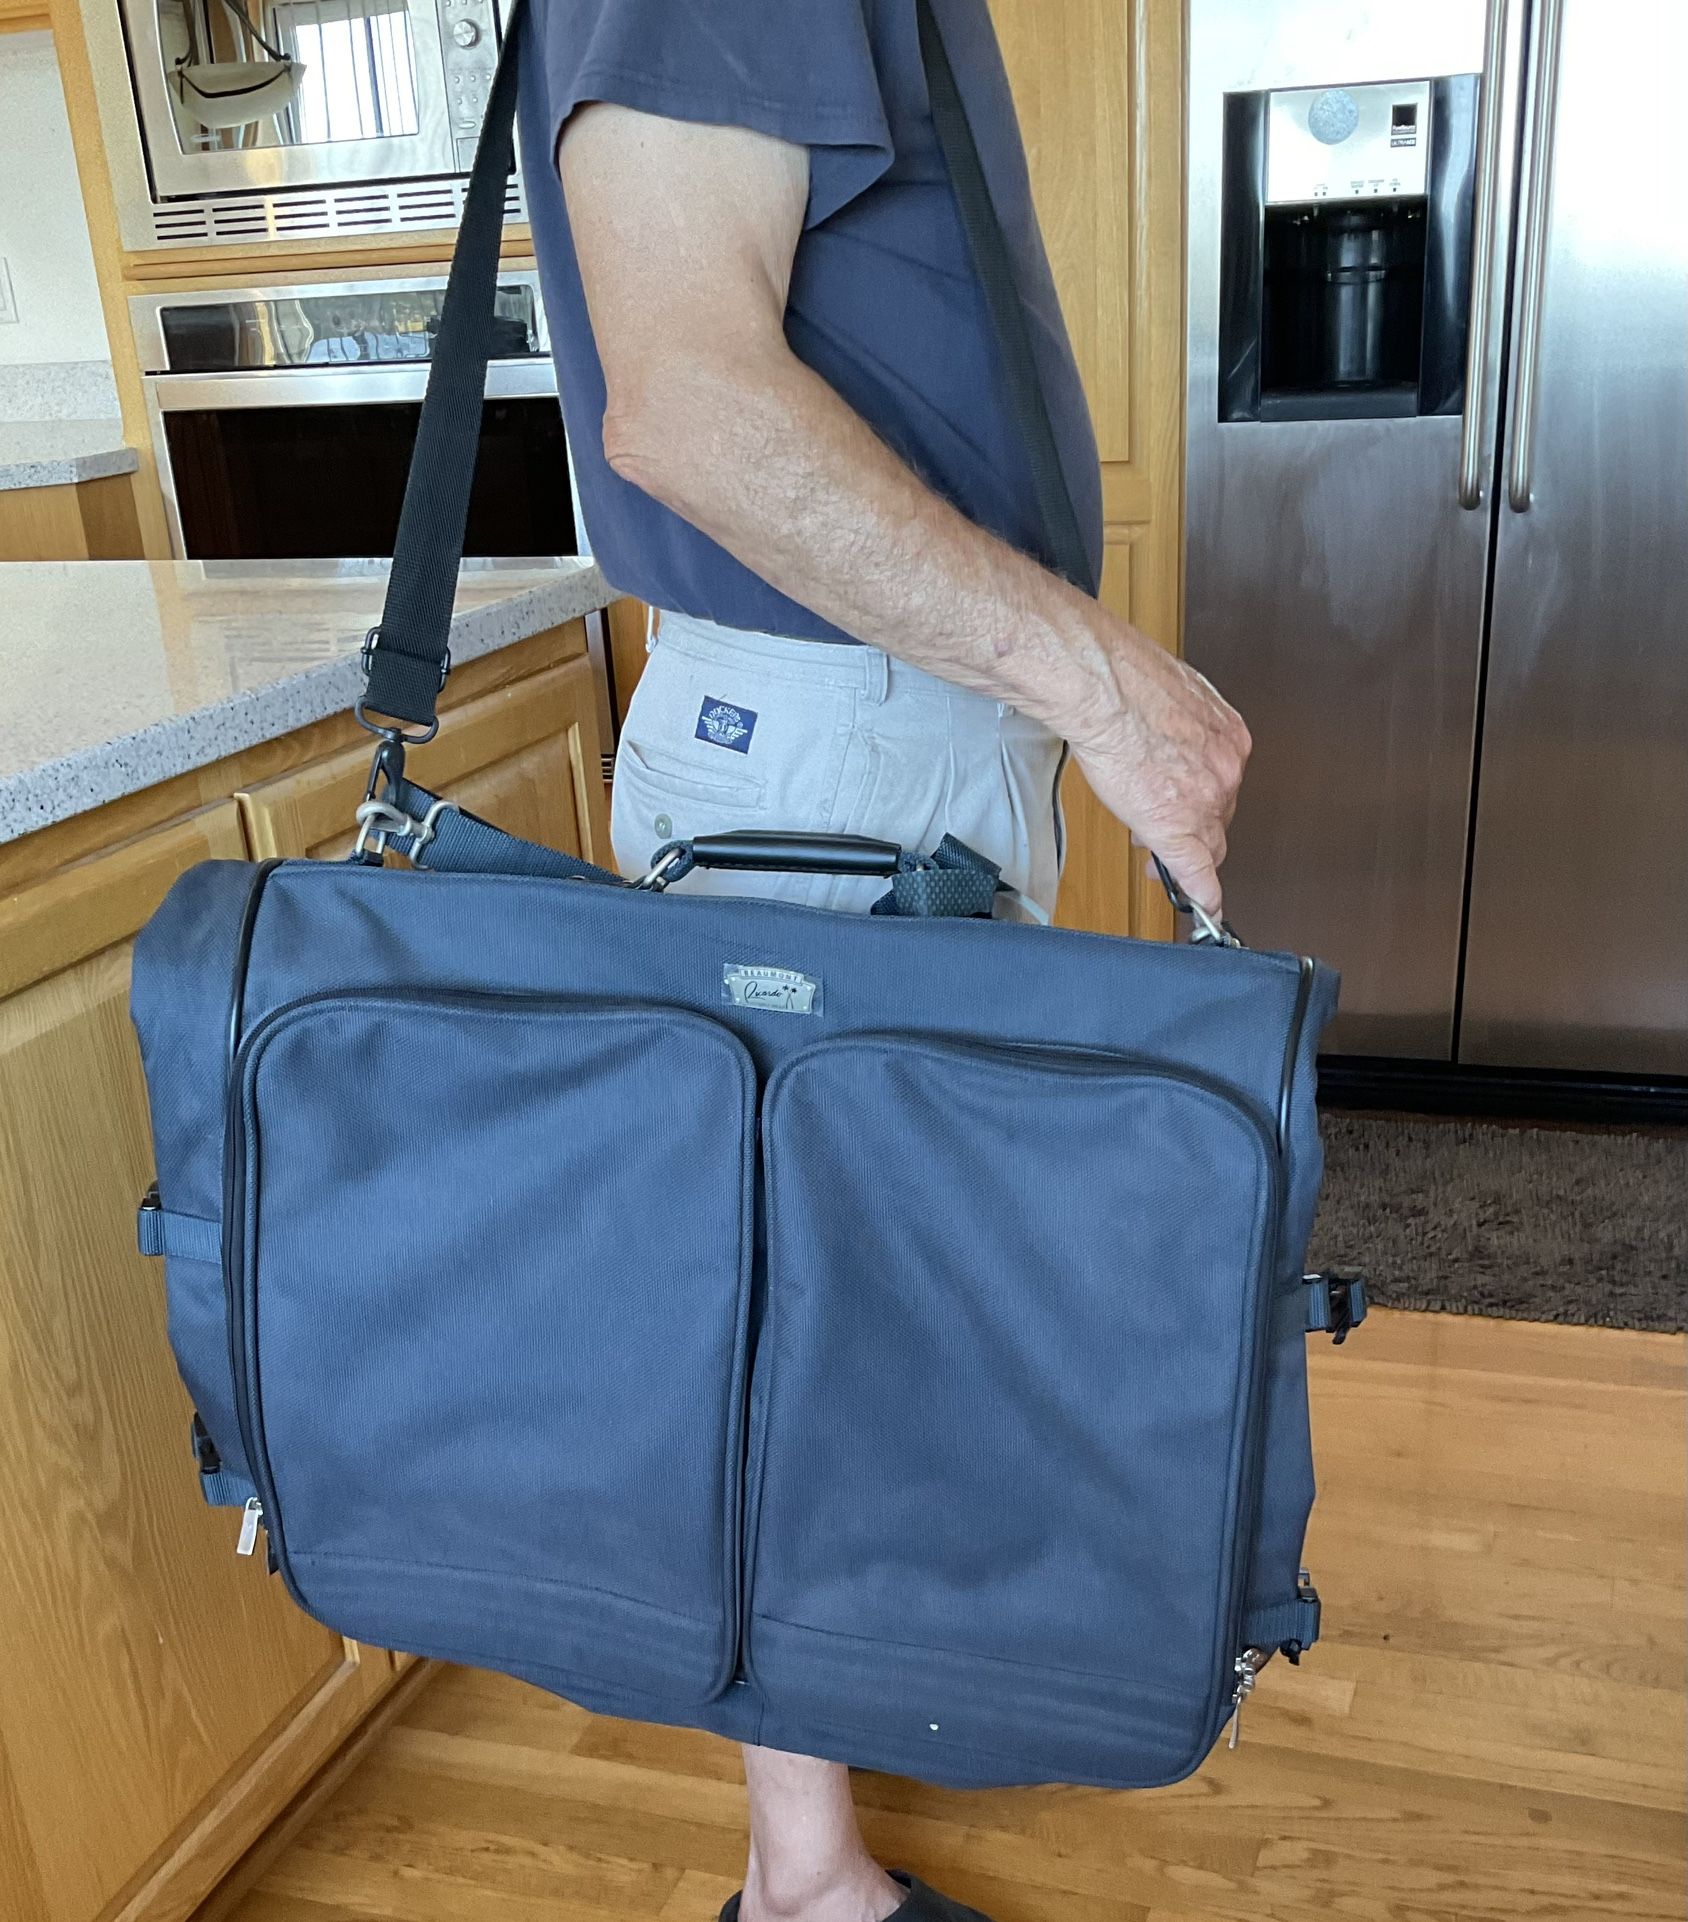 NEW Quality Garment Travel Bag For Suits Or Dresses